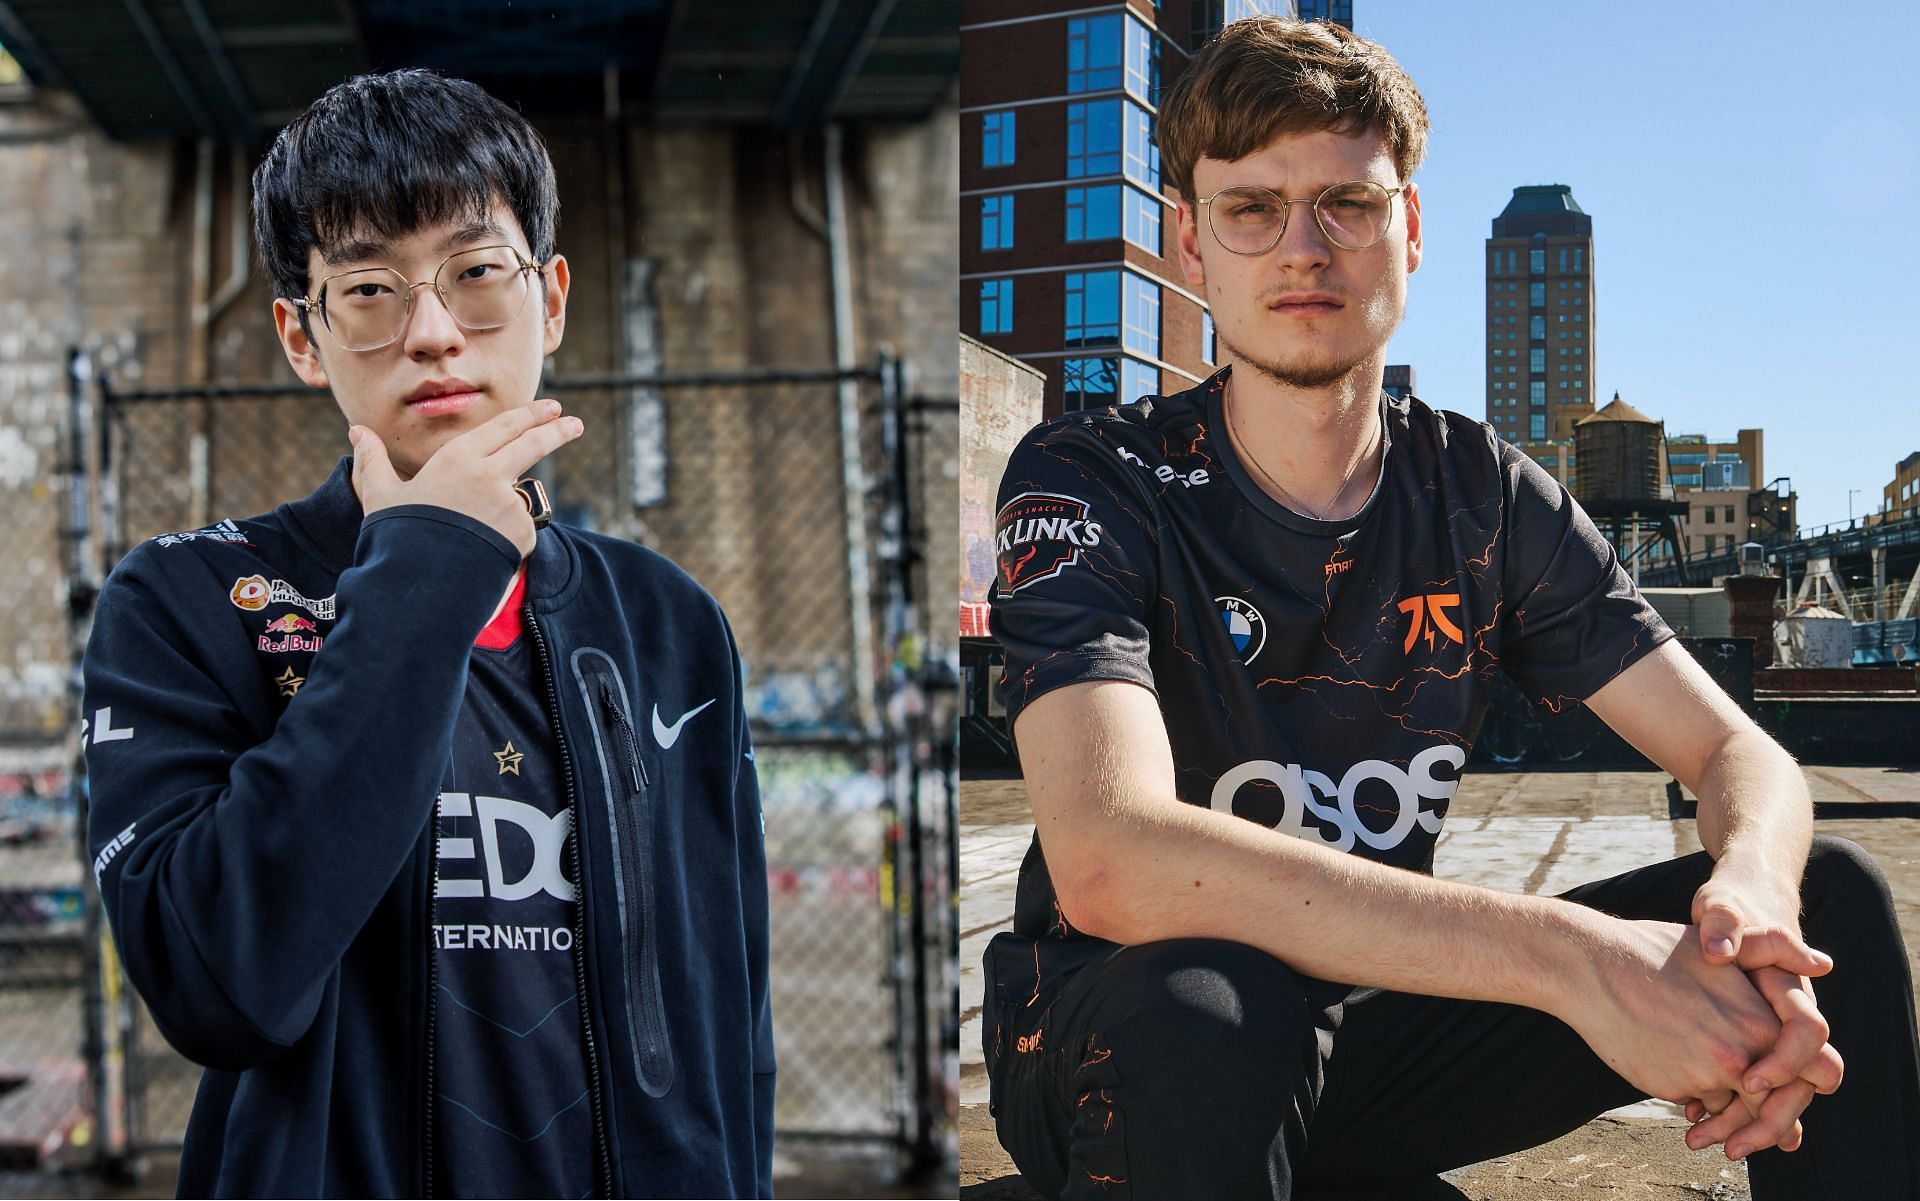 EDG vs Fnatic League of Legends Worlds 2022 Head-to-head, livestream details, and more